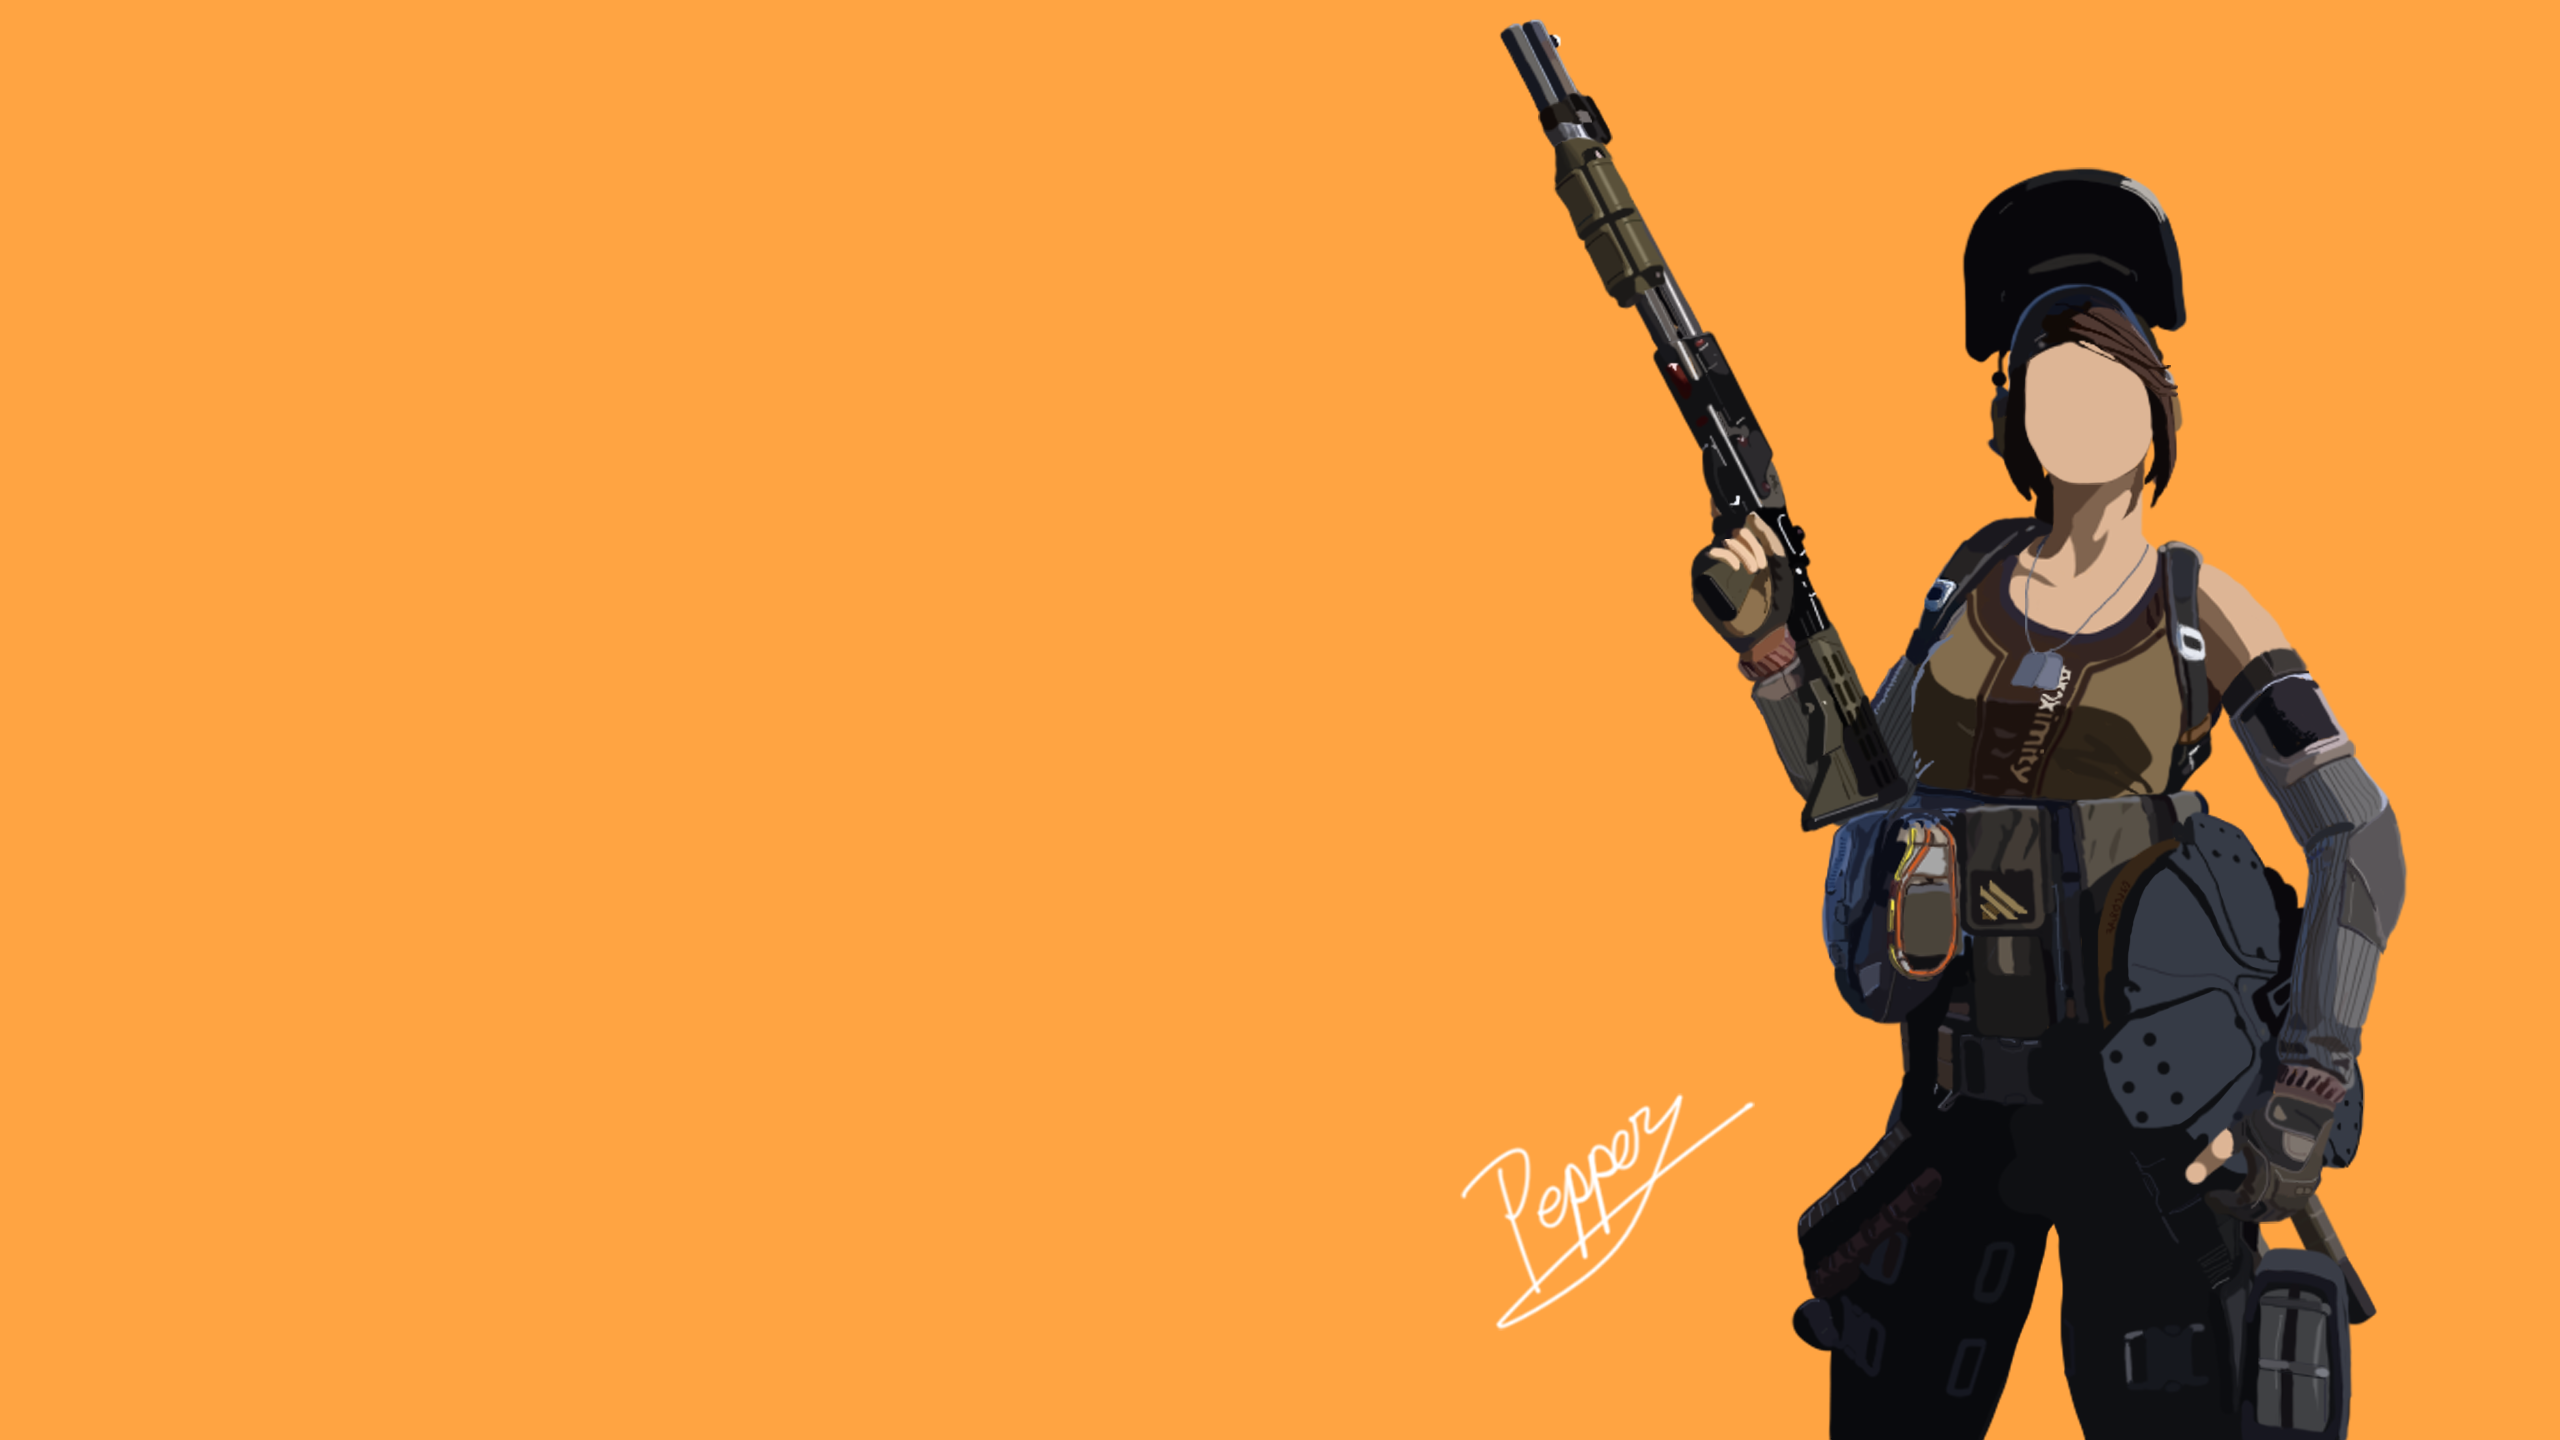 Dirty Bomb Wallpapers